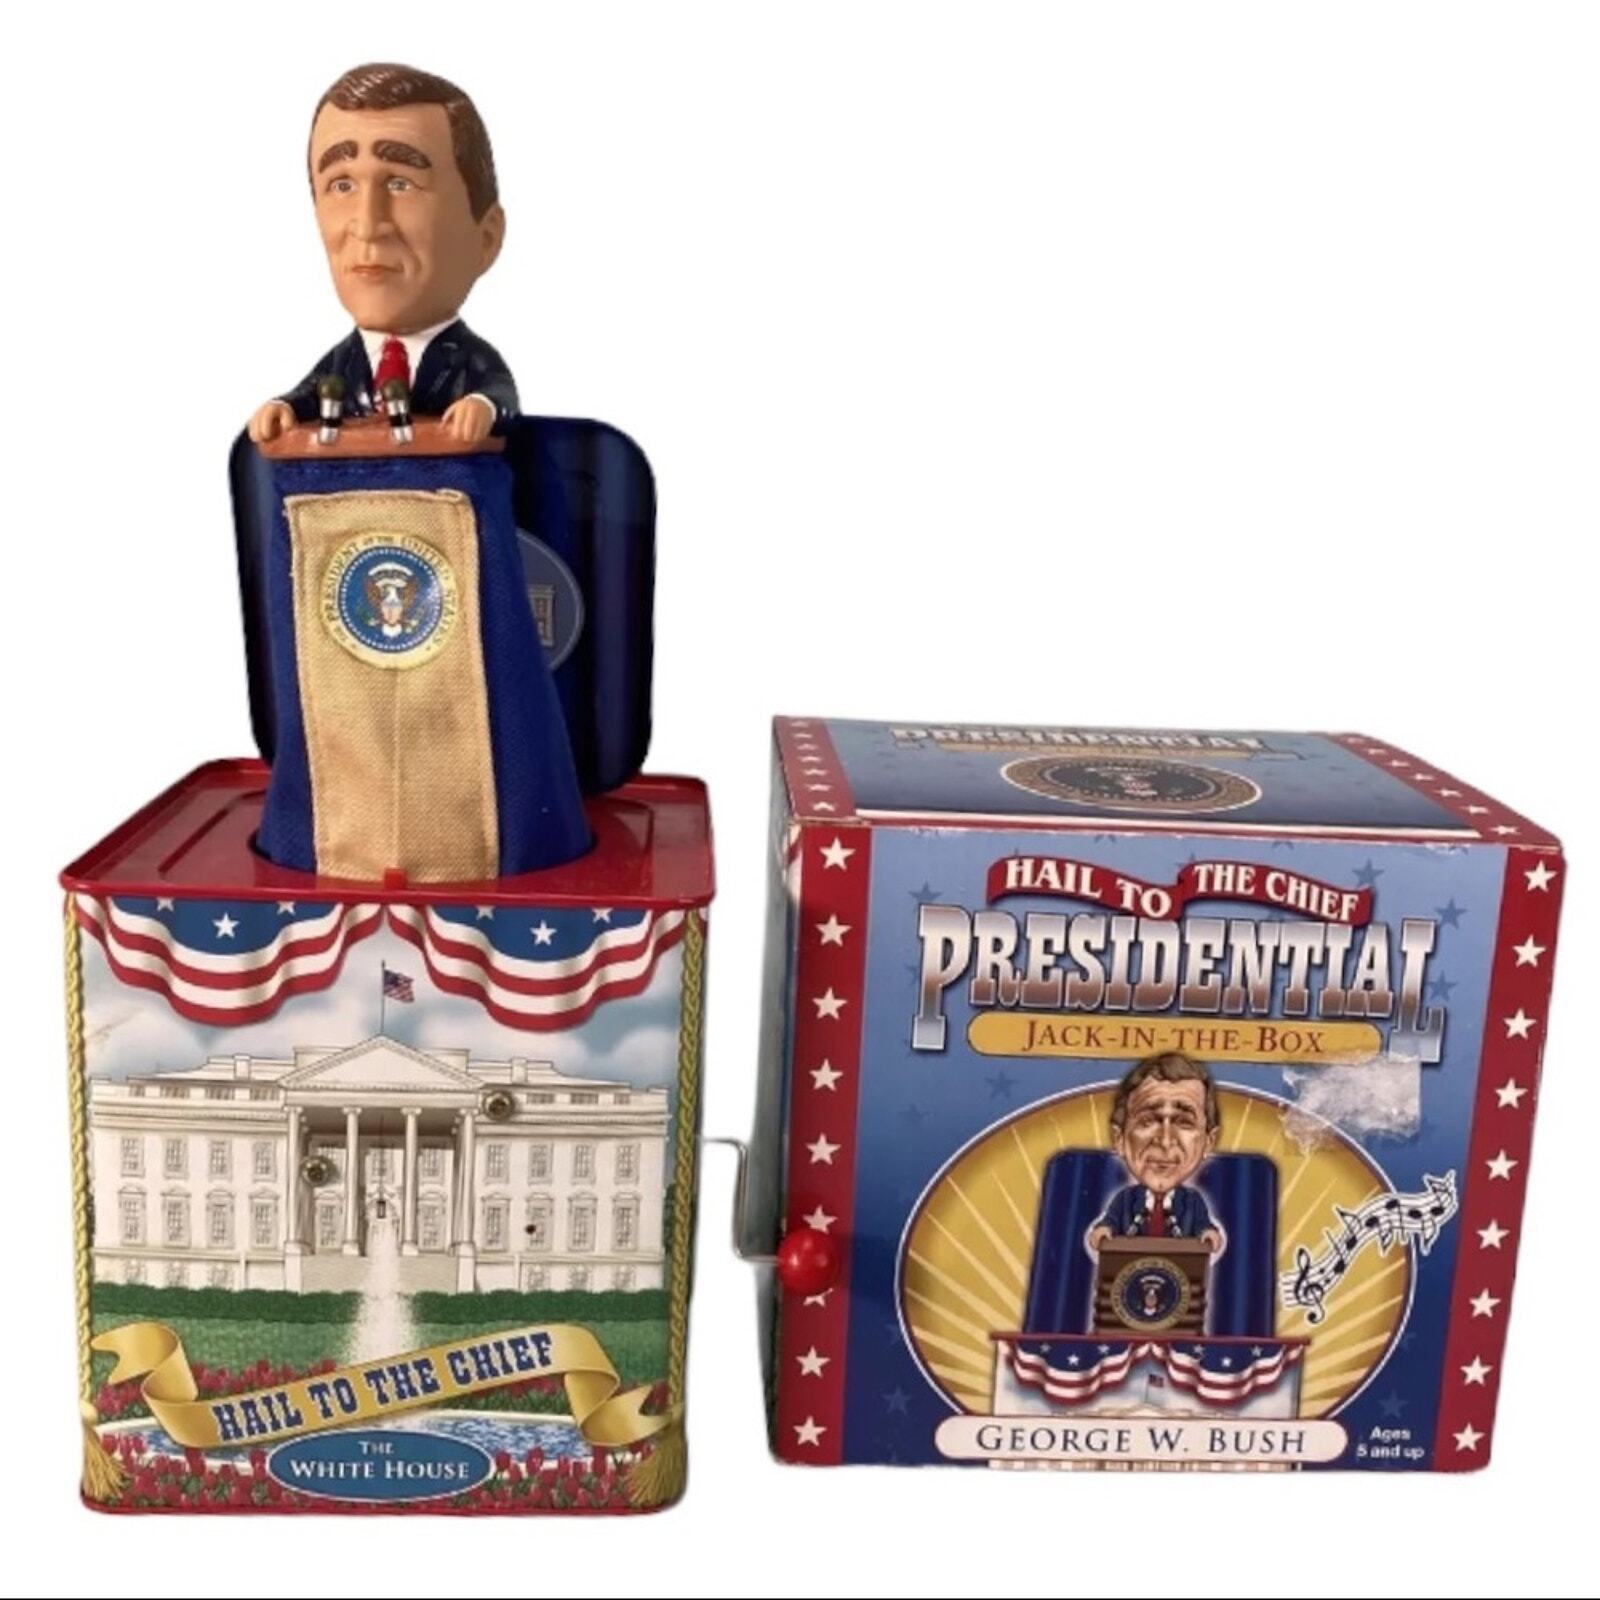 GEORGE W. BUSH Presidential Jack-In-The Box Collectible, Brand New In Box